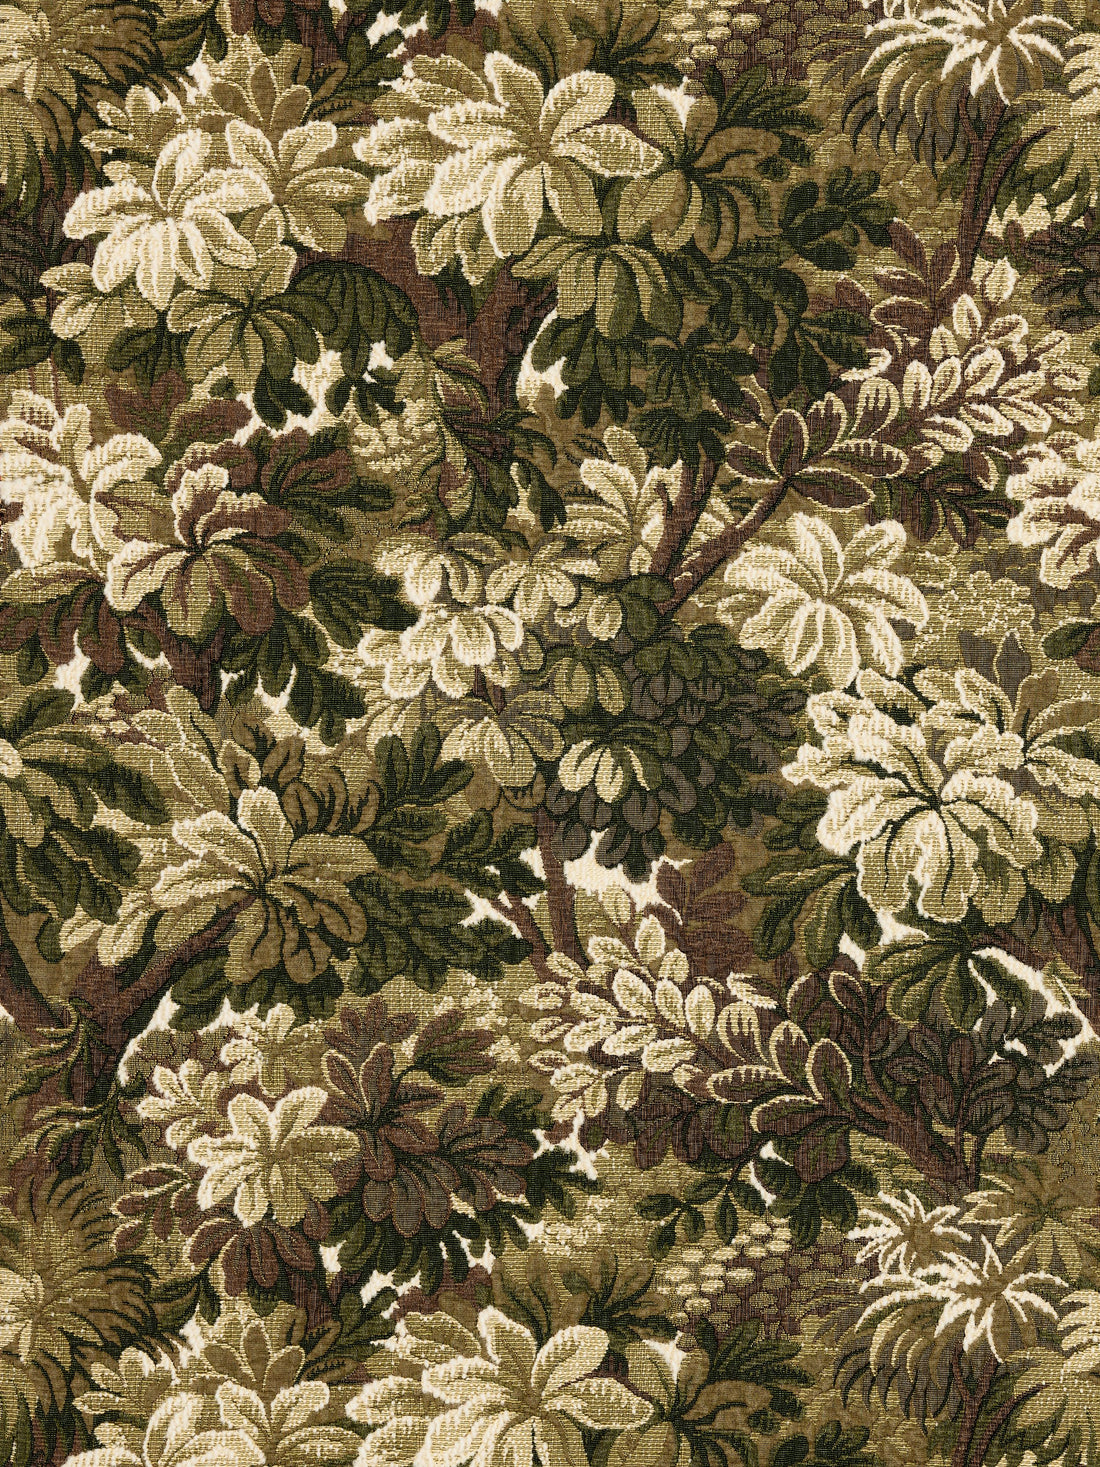 Ridge Edge fabric in moss color - pattern number BZ 0036060C - by Scalamandre in the Old World Weavers collection